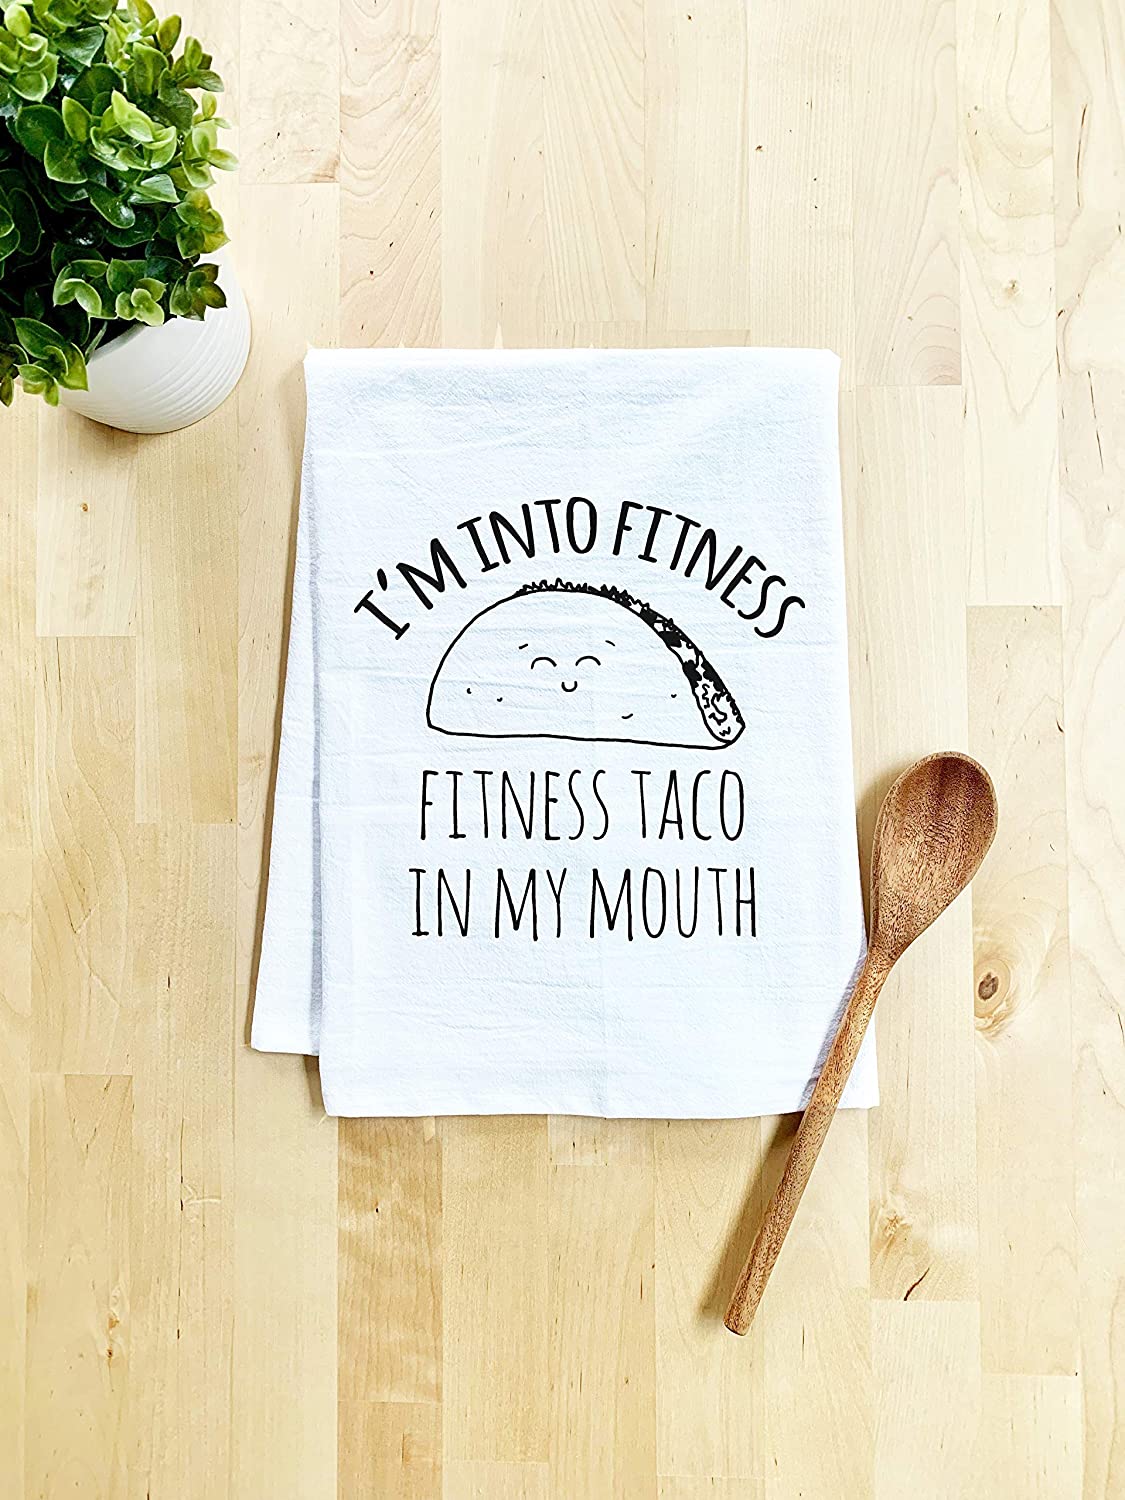 https://www.wideopencountry.com/wp-content/uploads/sites/4/eats/2021/03/Funny-Kitchen-Towel-Im-Into-Fitness-Fitness-Taco-In-My-Mouth-Flour-Sack-Dish-Towel-Sweet-Housewarming-Gift-White-.jpg?resize=1125%2C1500